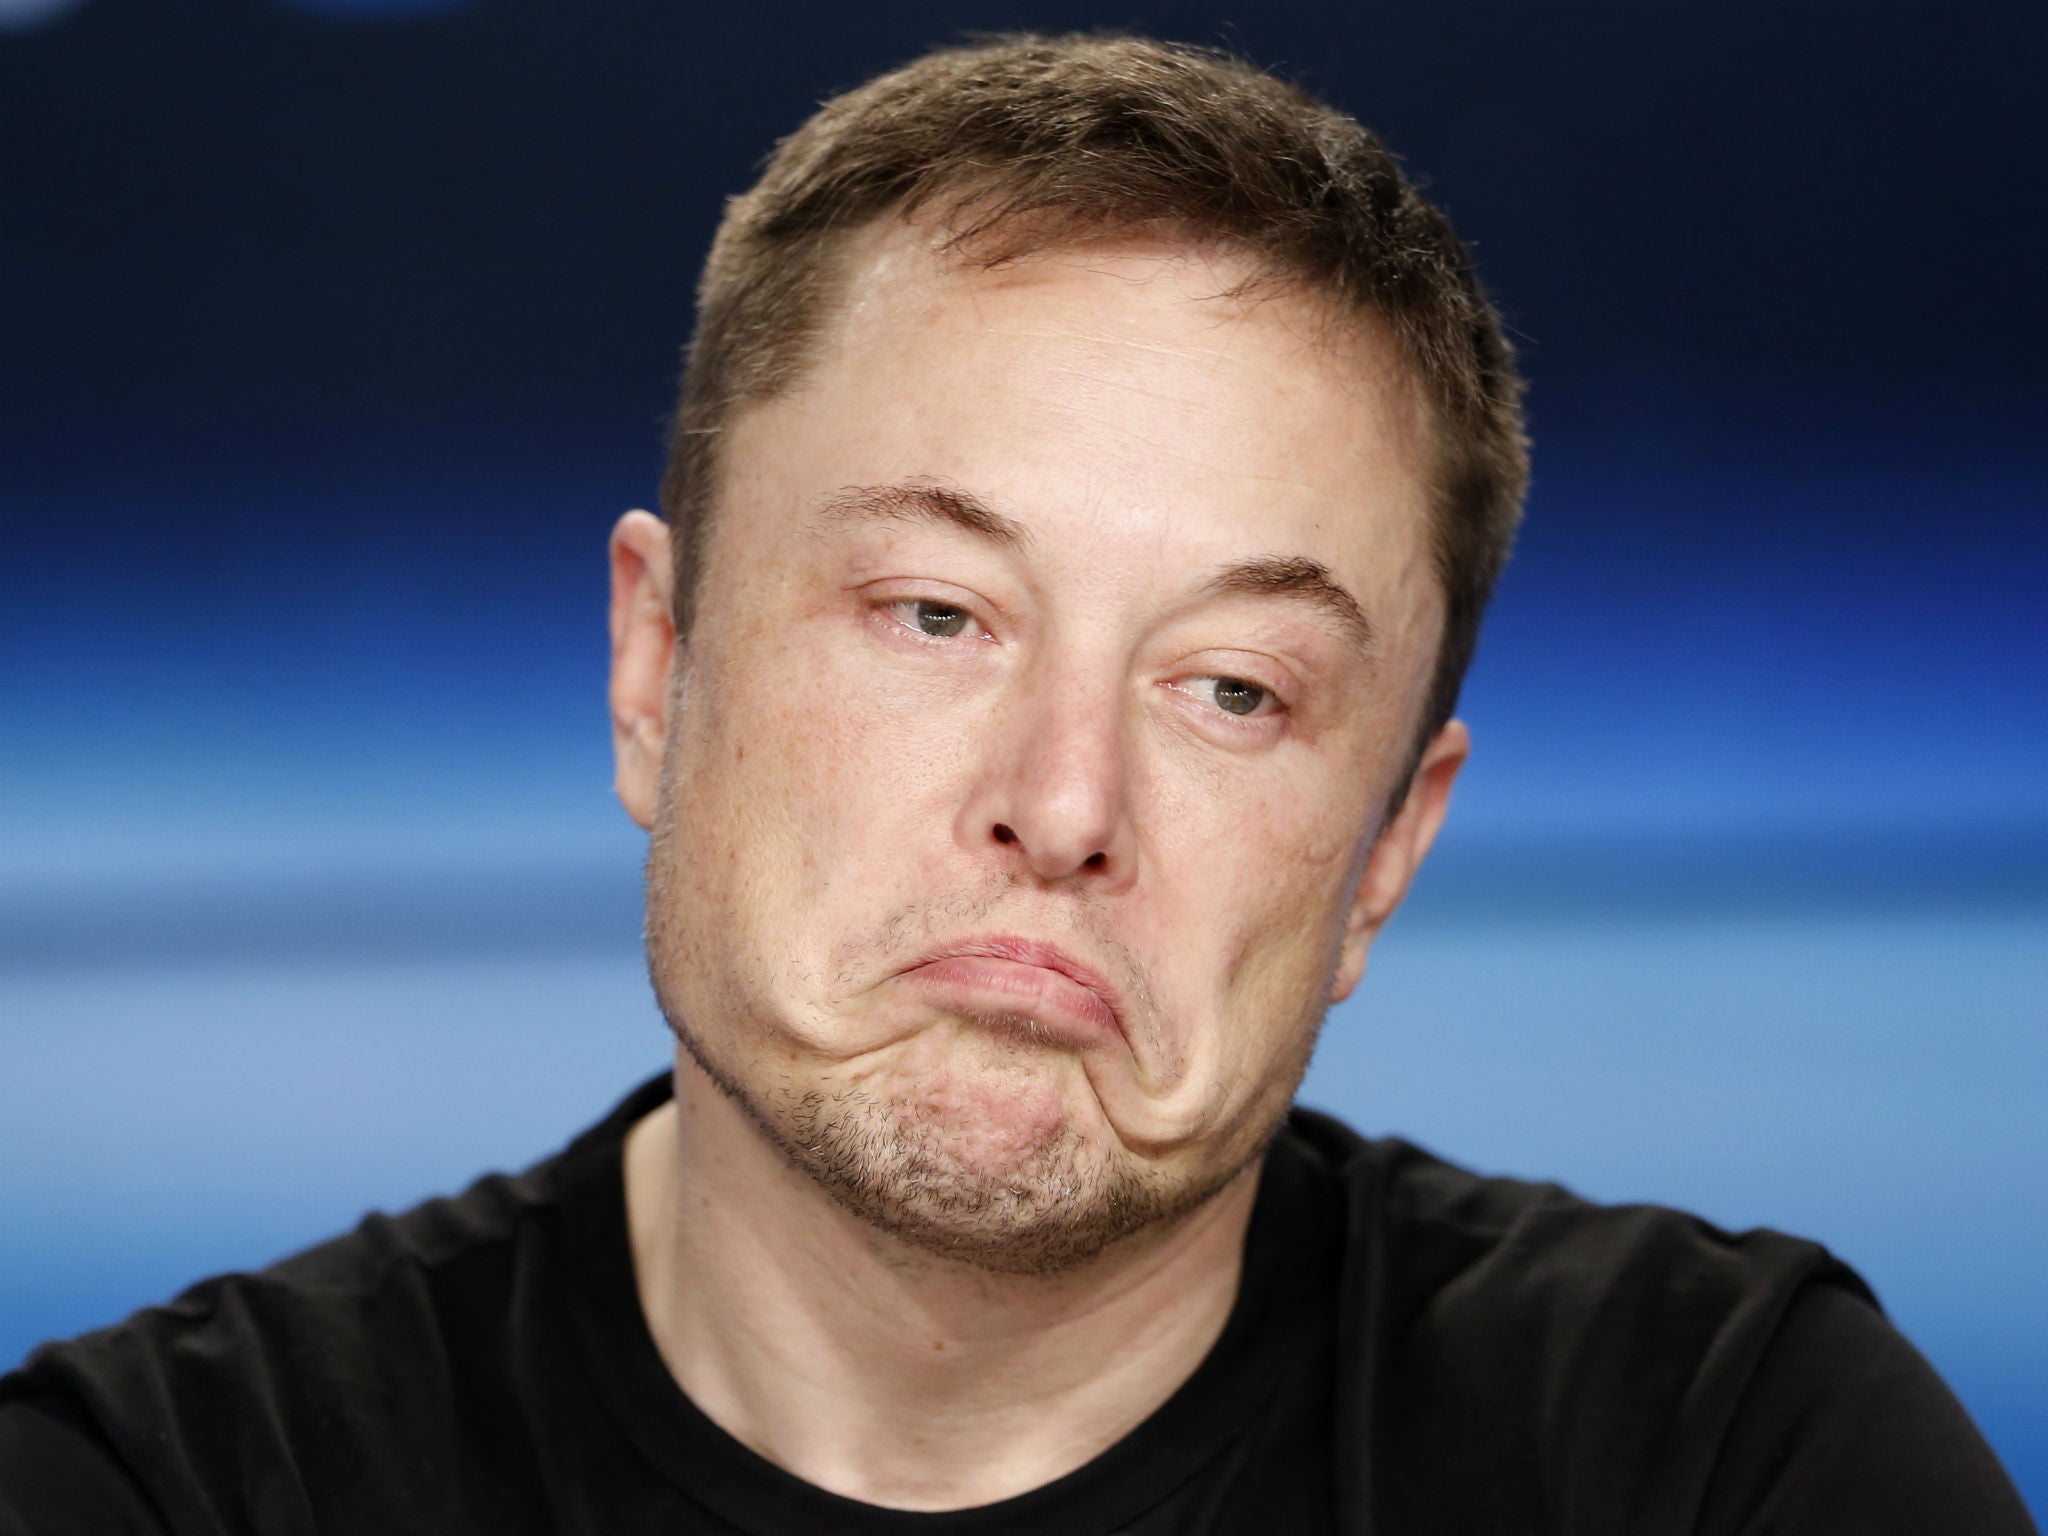 Wall Street was not quite sure what to make of Elon Musk's unusual earnings call